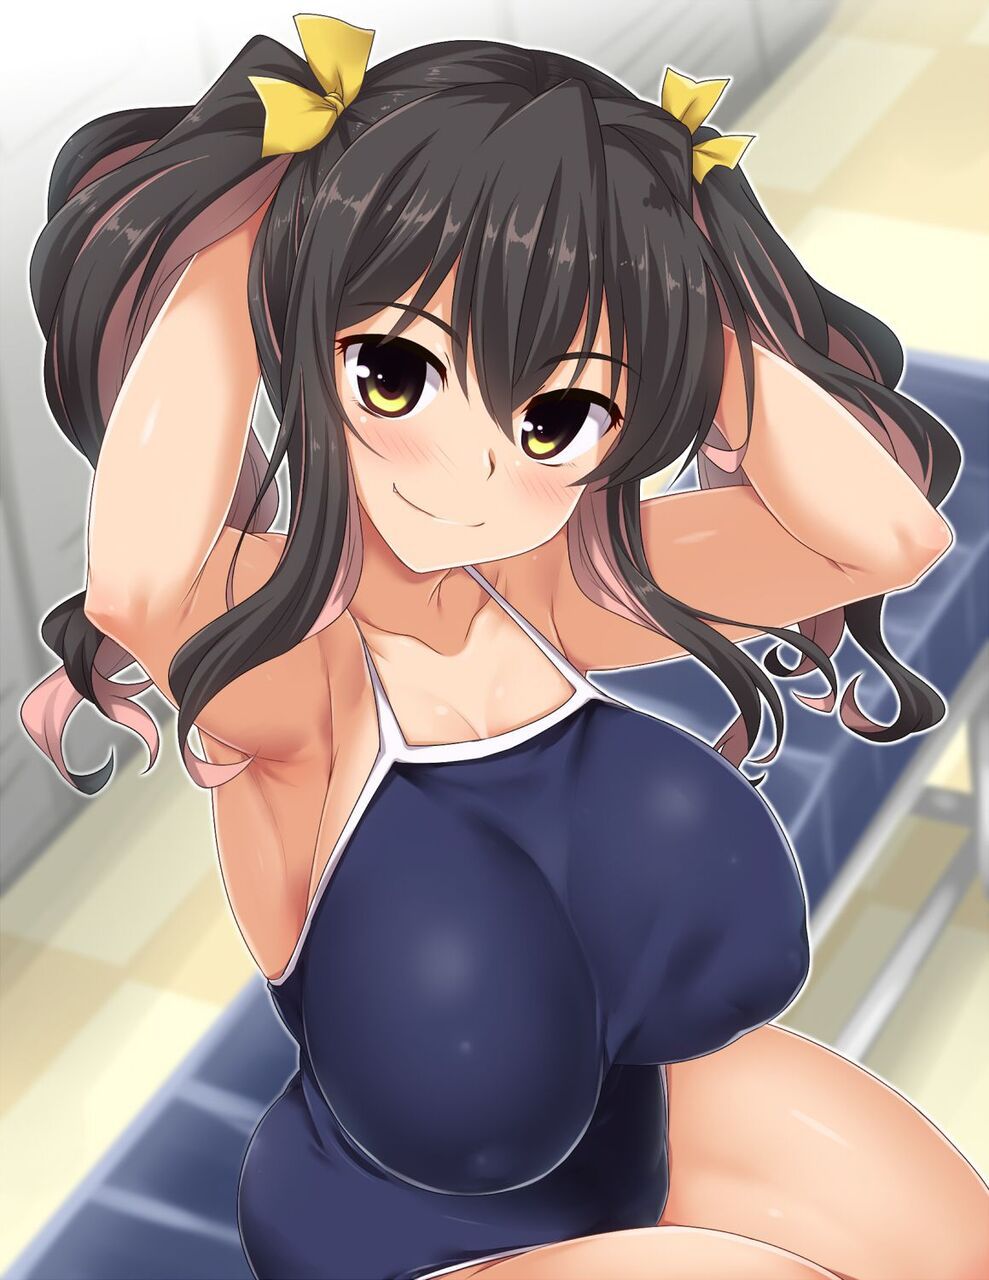 【Sukusui】An image of a suku water girl who looks good on the dazzling sun Part 8 9